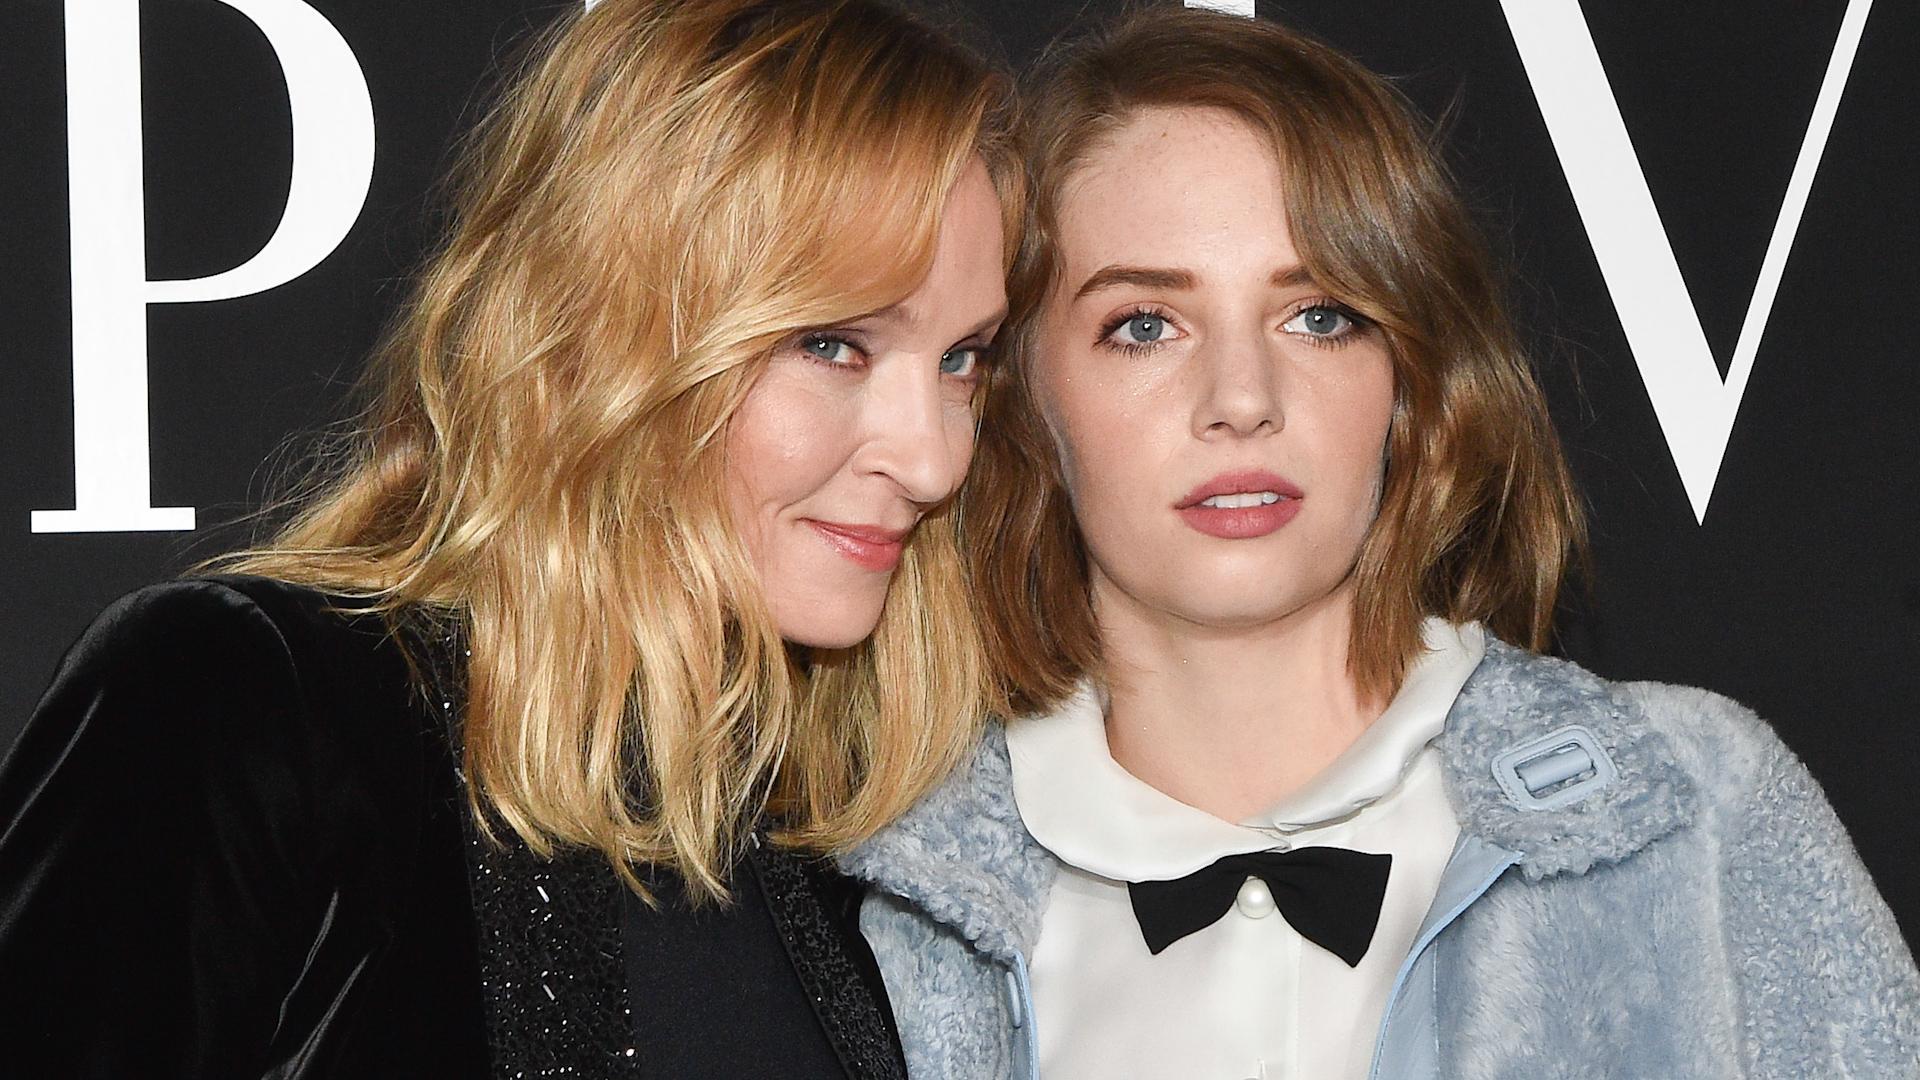 Uma Thurman and Her Lookalike Daughter Maya Hawke are Style Goals at